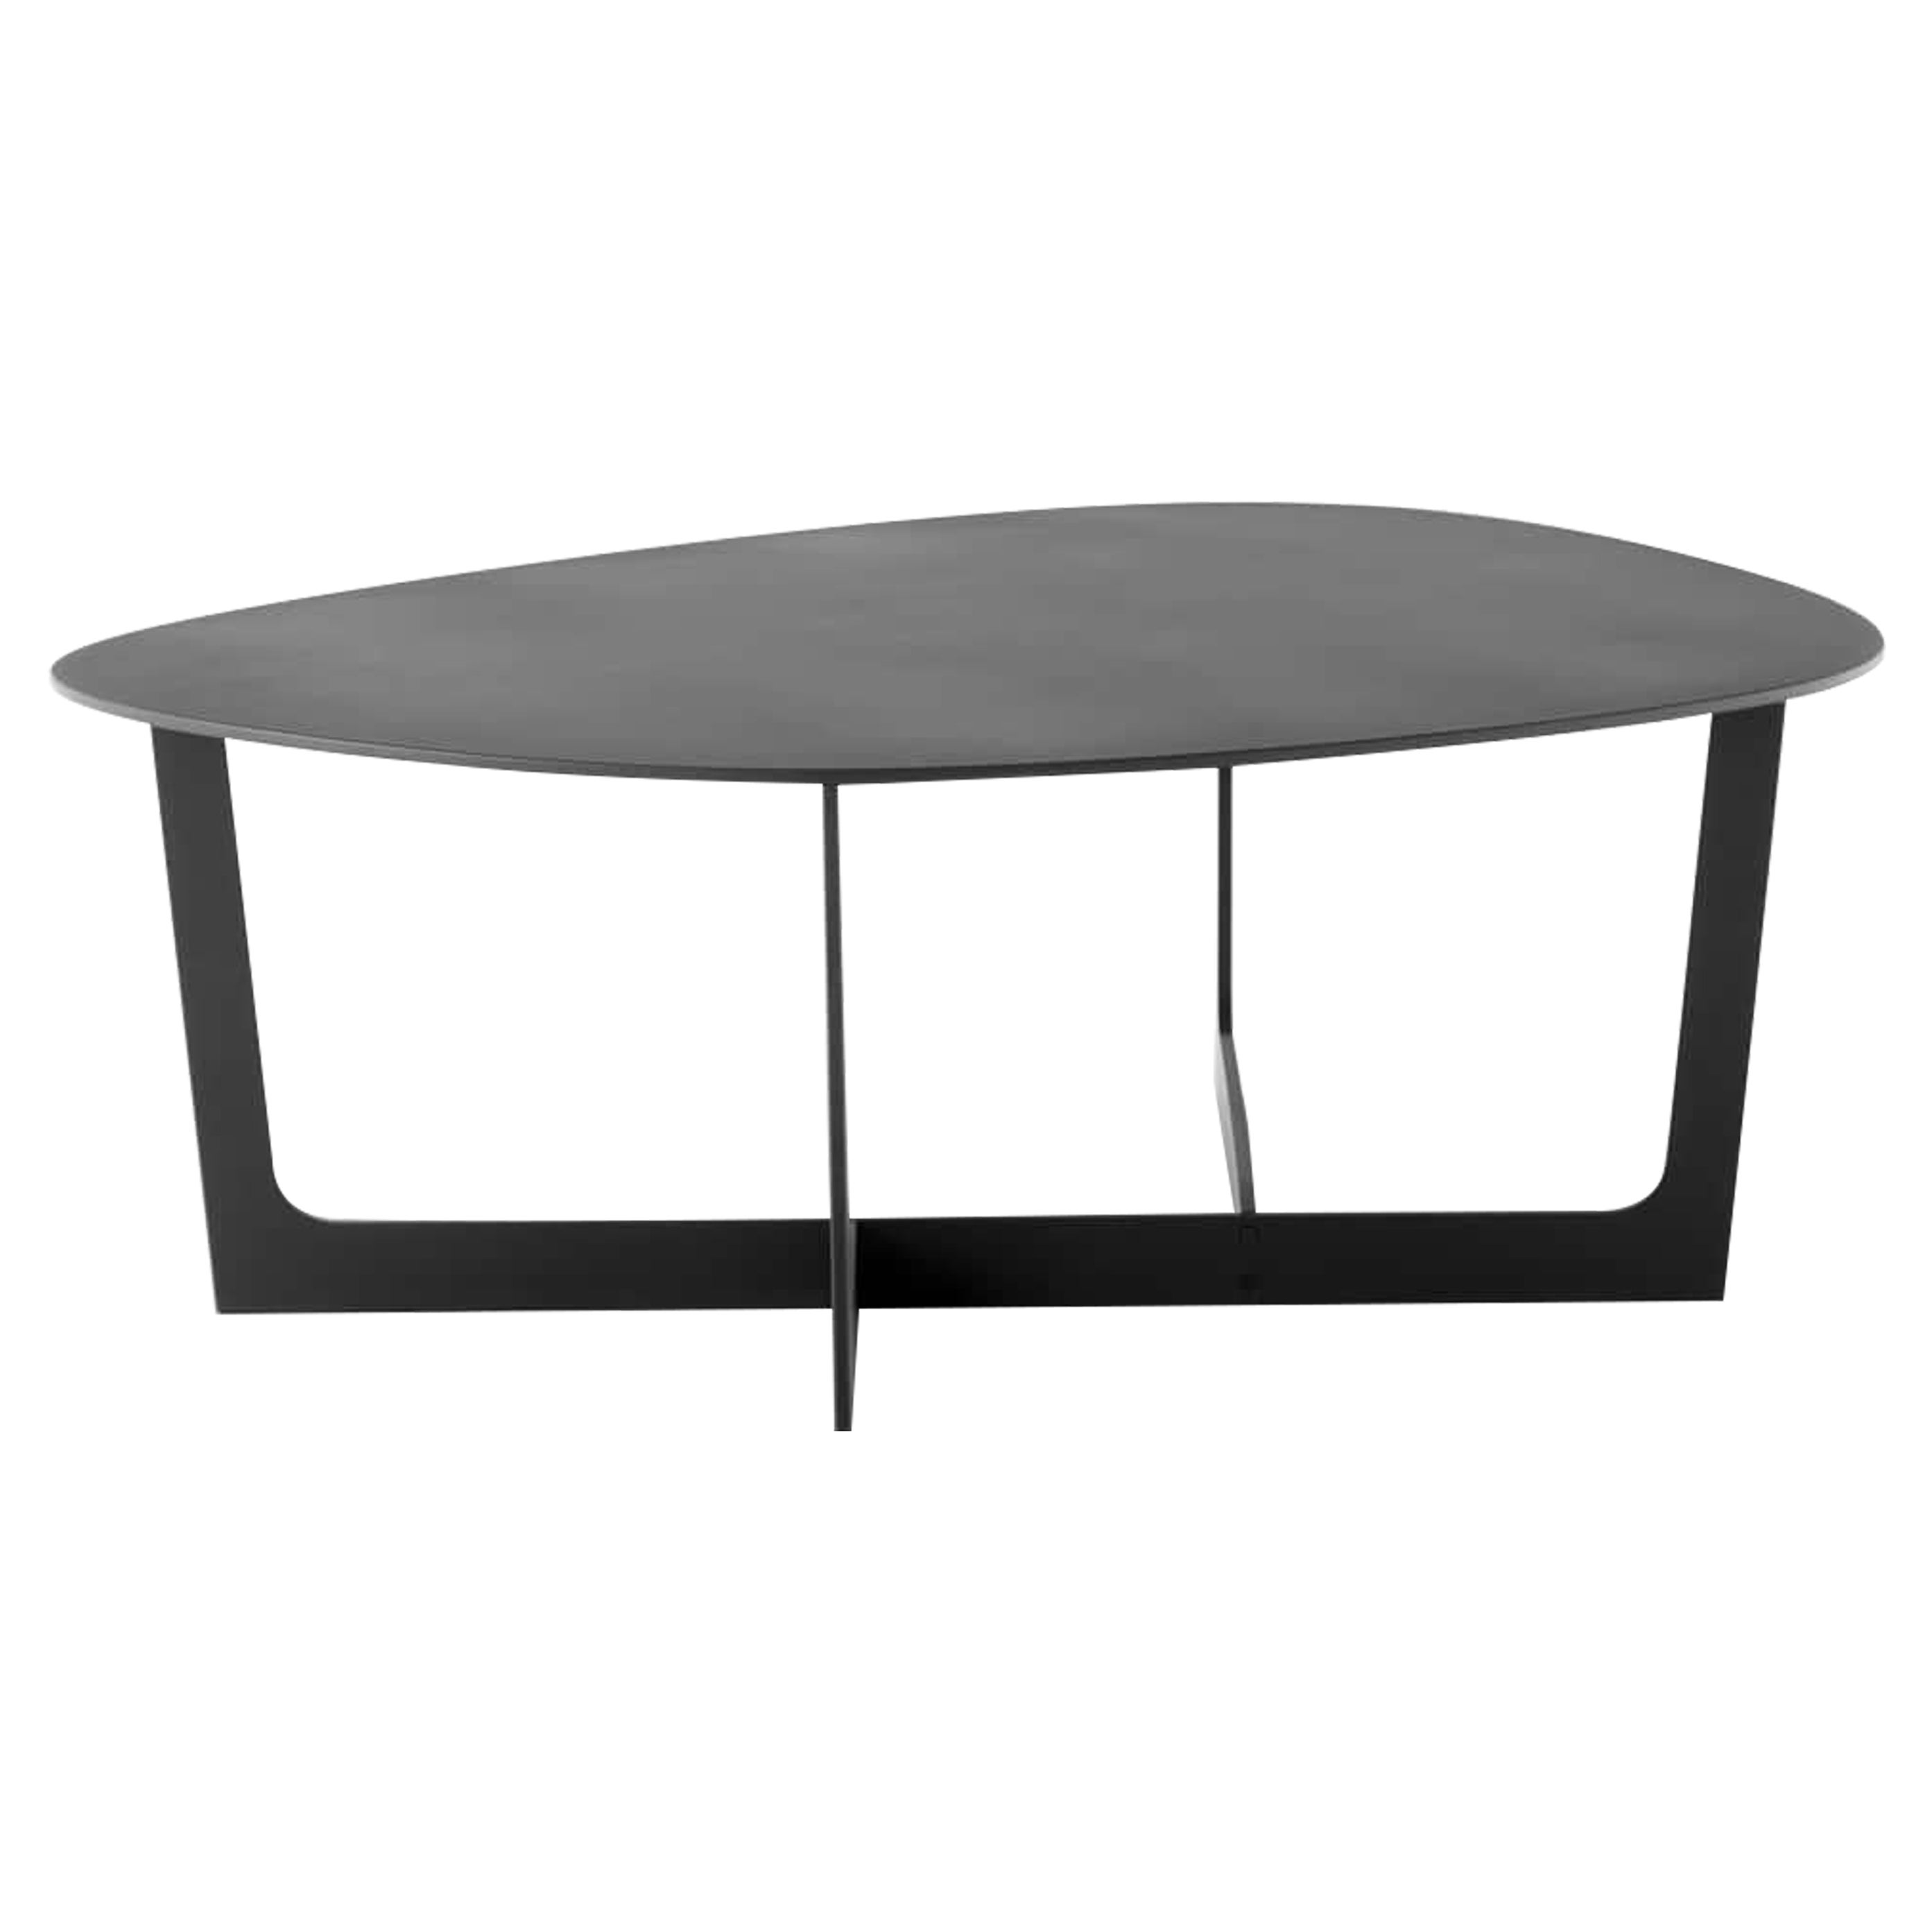 Insula Coffee Table M5191 - Aluminum, textured black lacquered for Fredericia